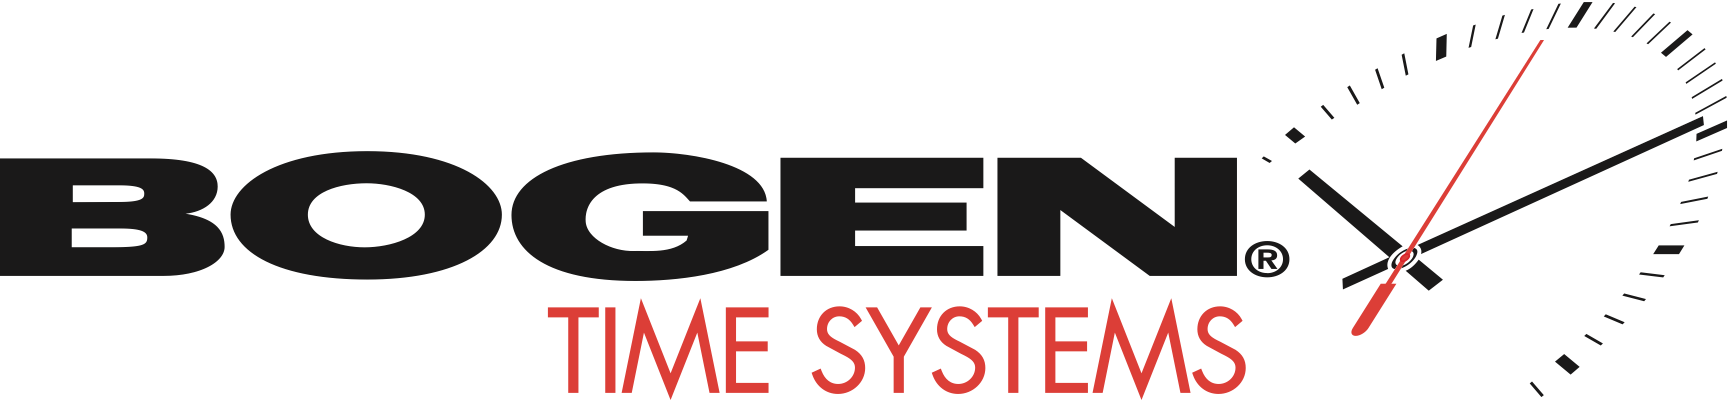 Bogen Time Systems Graphic